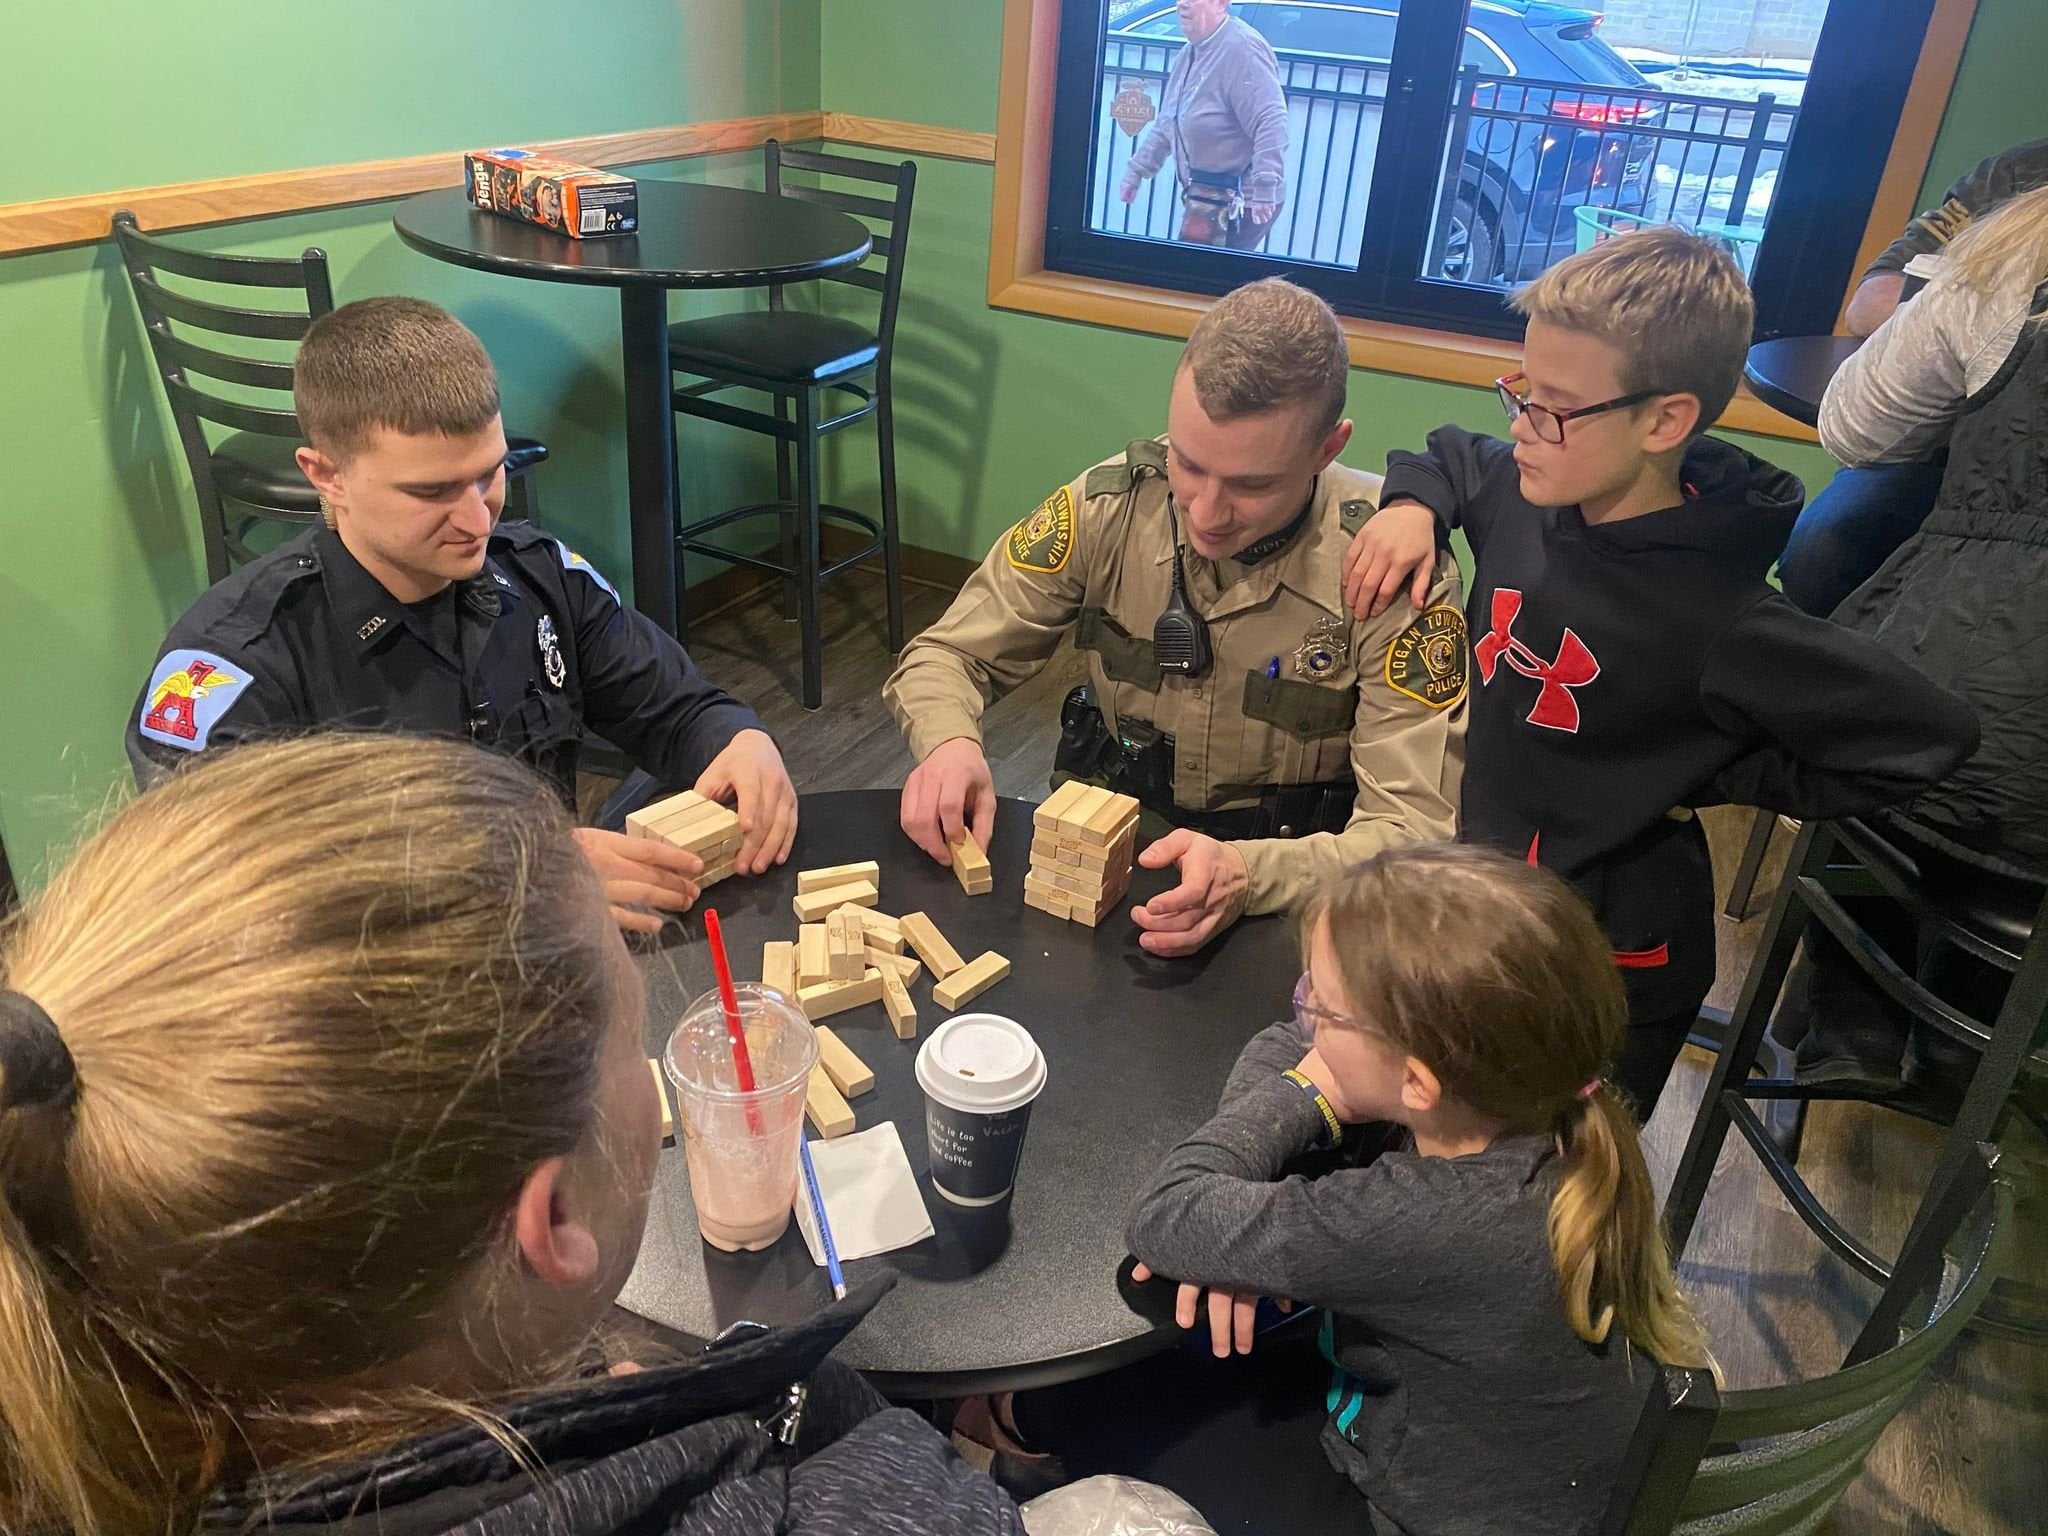 Officers playing a game with children.